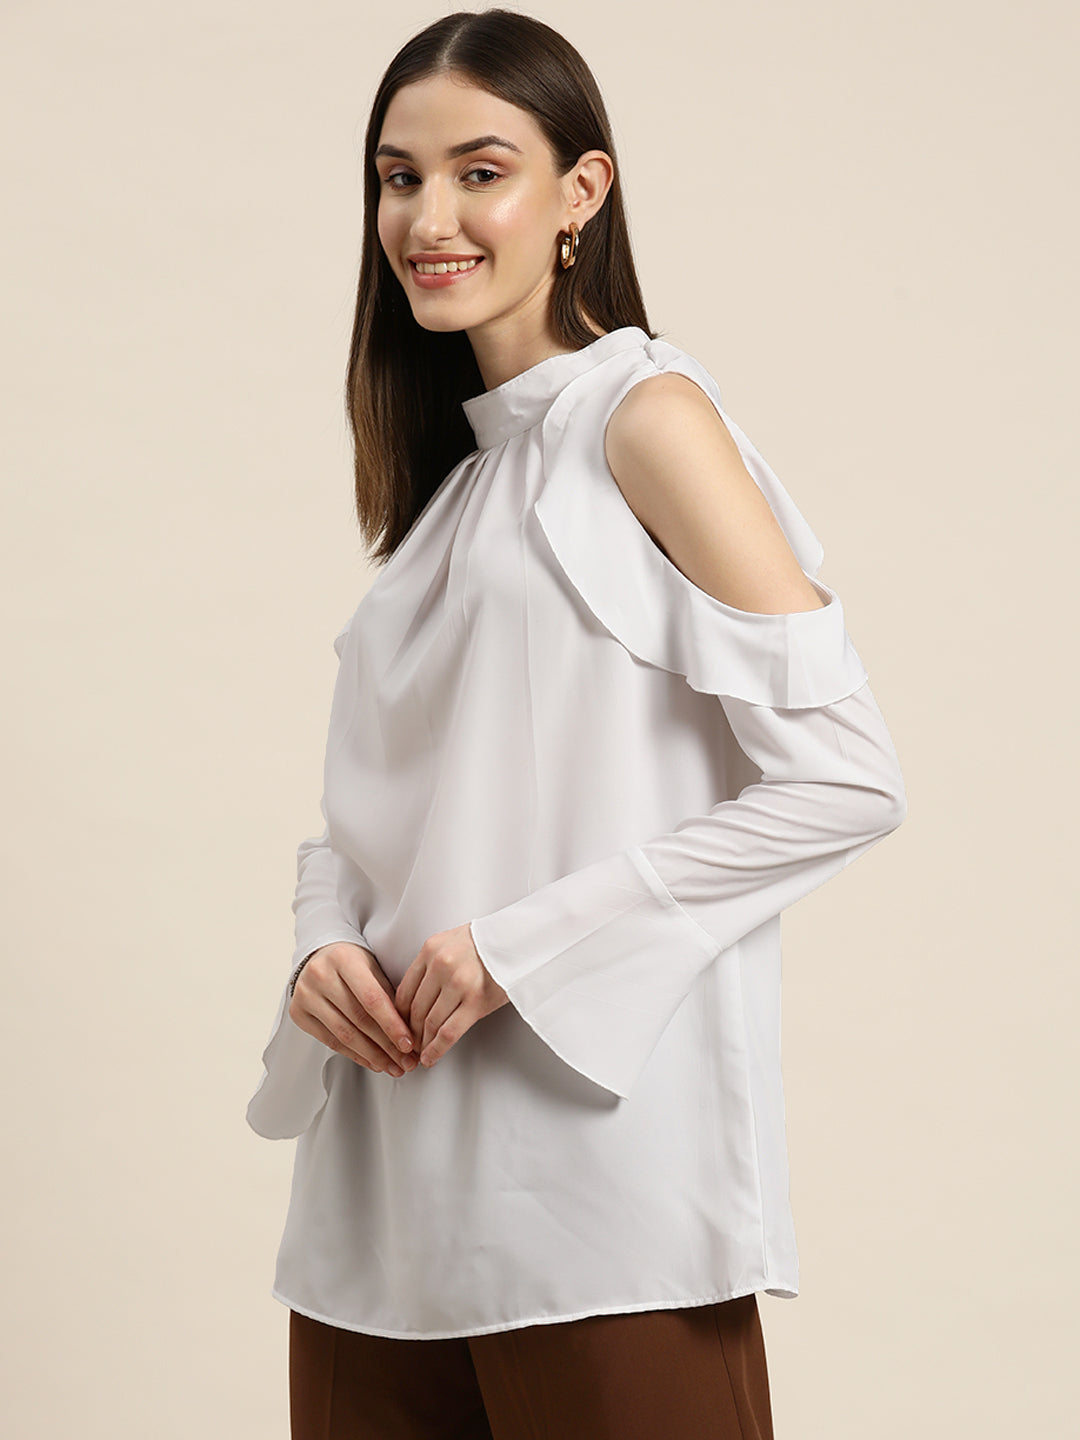 Solid Light White Regular Fit Banded Collar Full Ruffle Sleeve Crepe Top